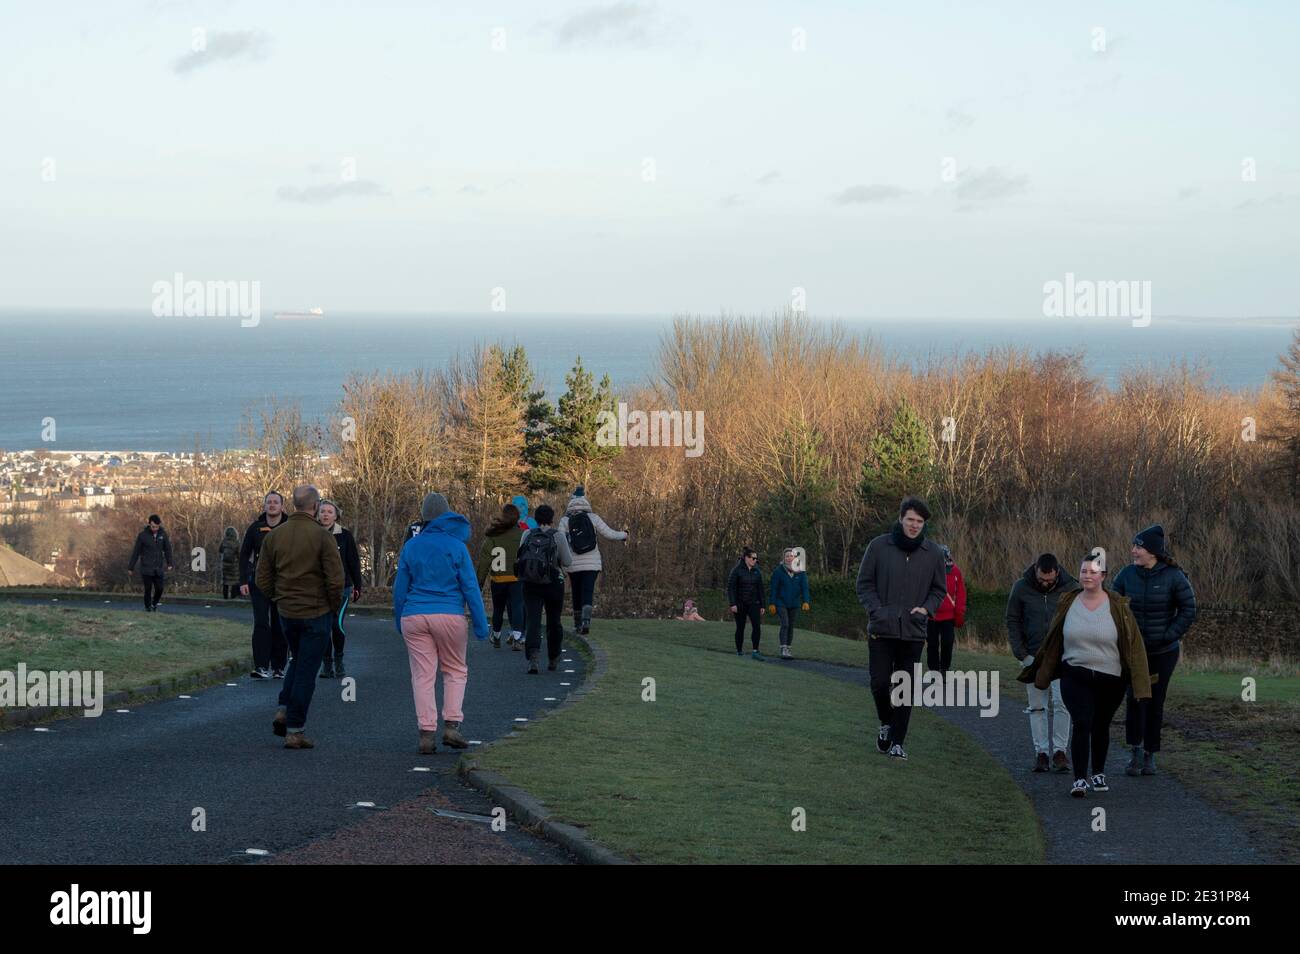 Edinburgh, Scotland, UK. 16th of January 2021: Coronavirus Daily Exercise. The roads and pathways in Holyrood Park were busy with people taking their daily exercise. For those up for the climb, the very top of Arthur's Seat gave some great views across Scotland’s capital city.Credit: Alamy Live News Stock Photo